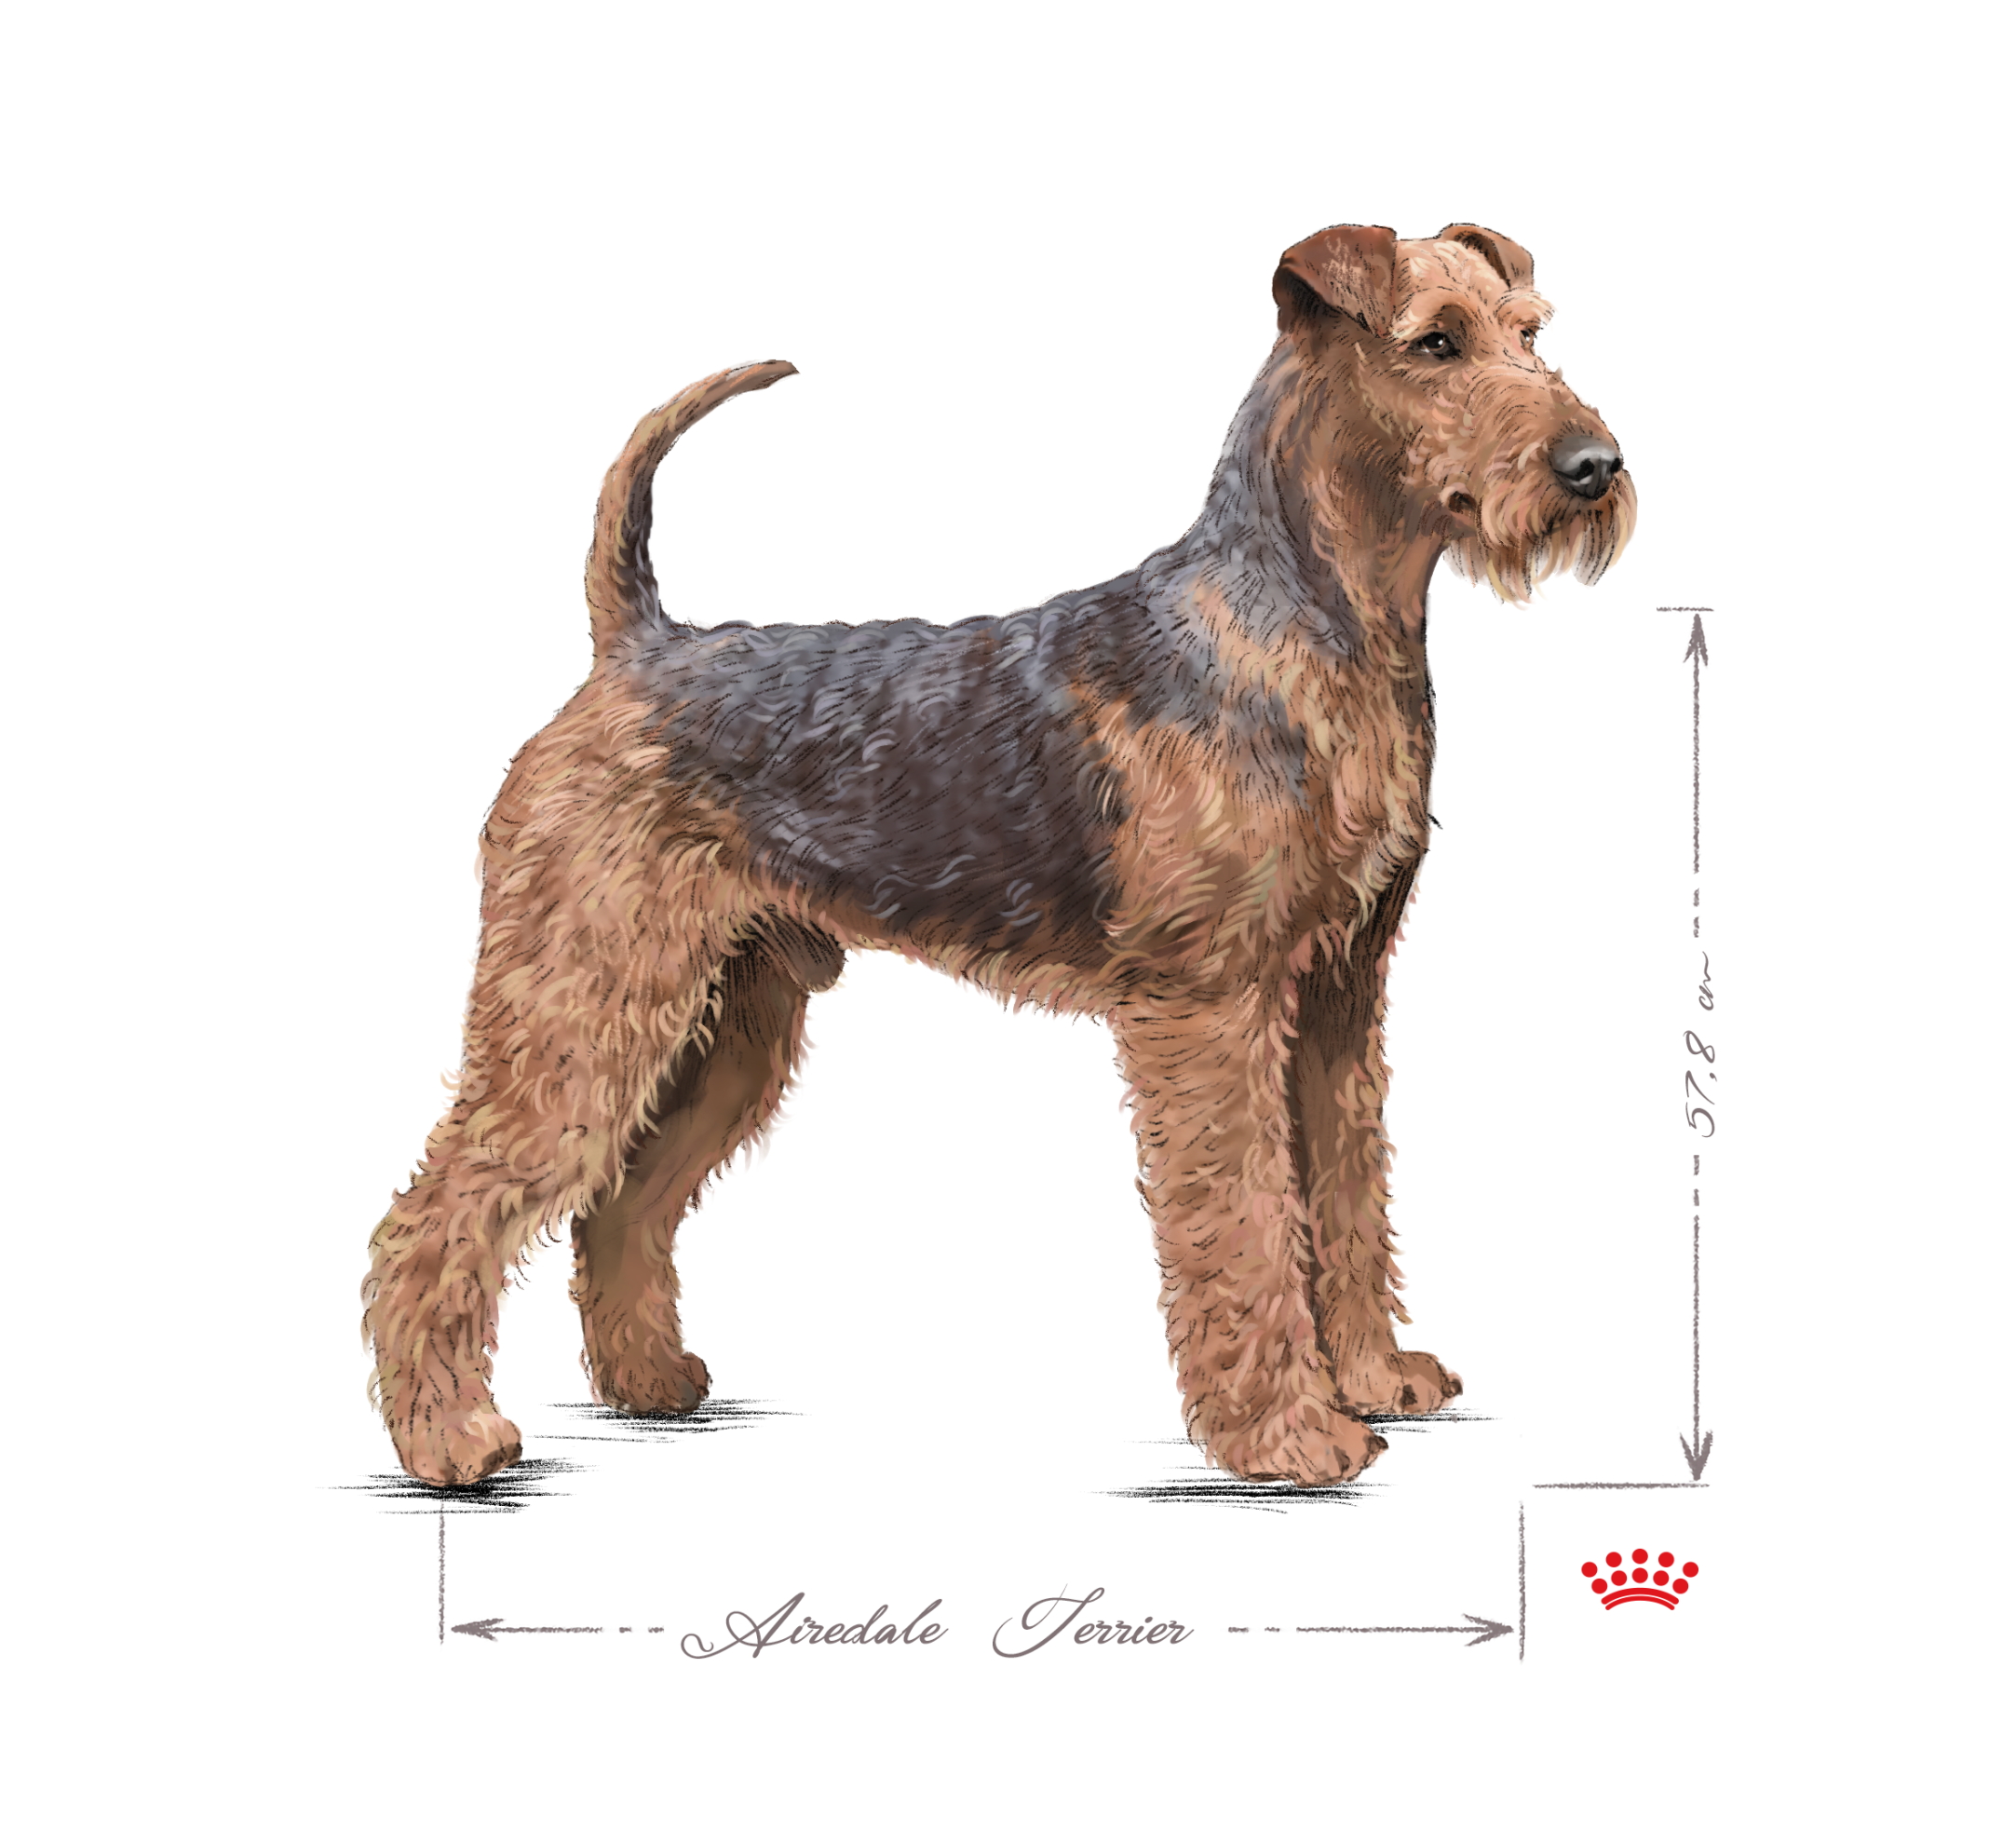 Airedale Terrier Adult in black and white